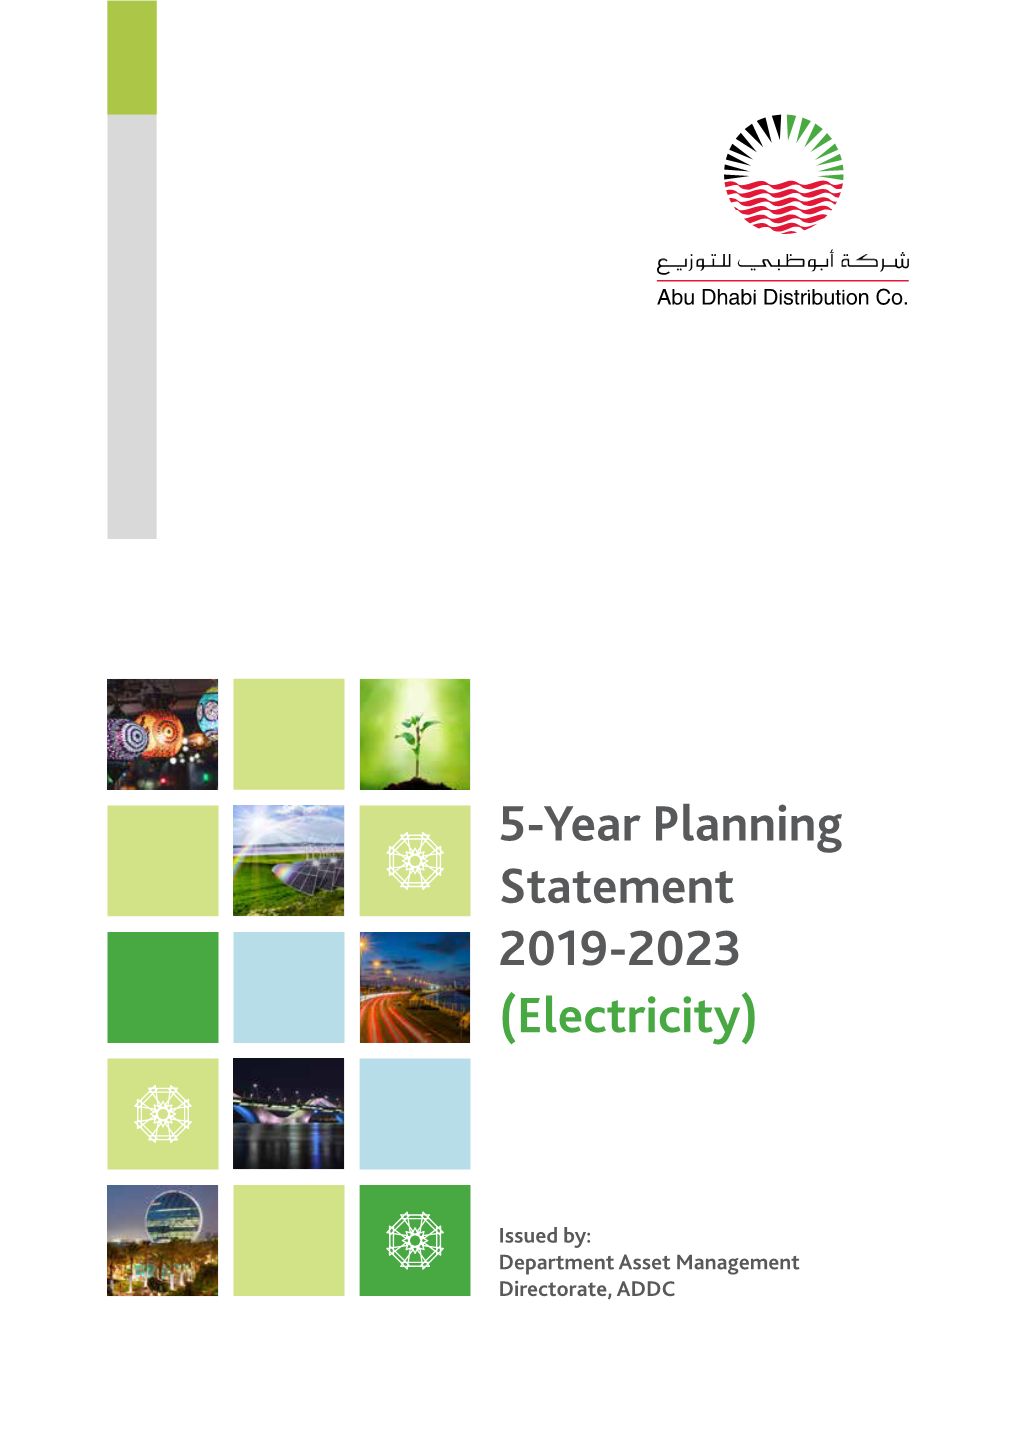 5-Year Planning Statement 2019-2023 (Electricity)